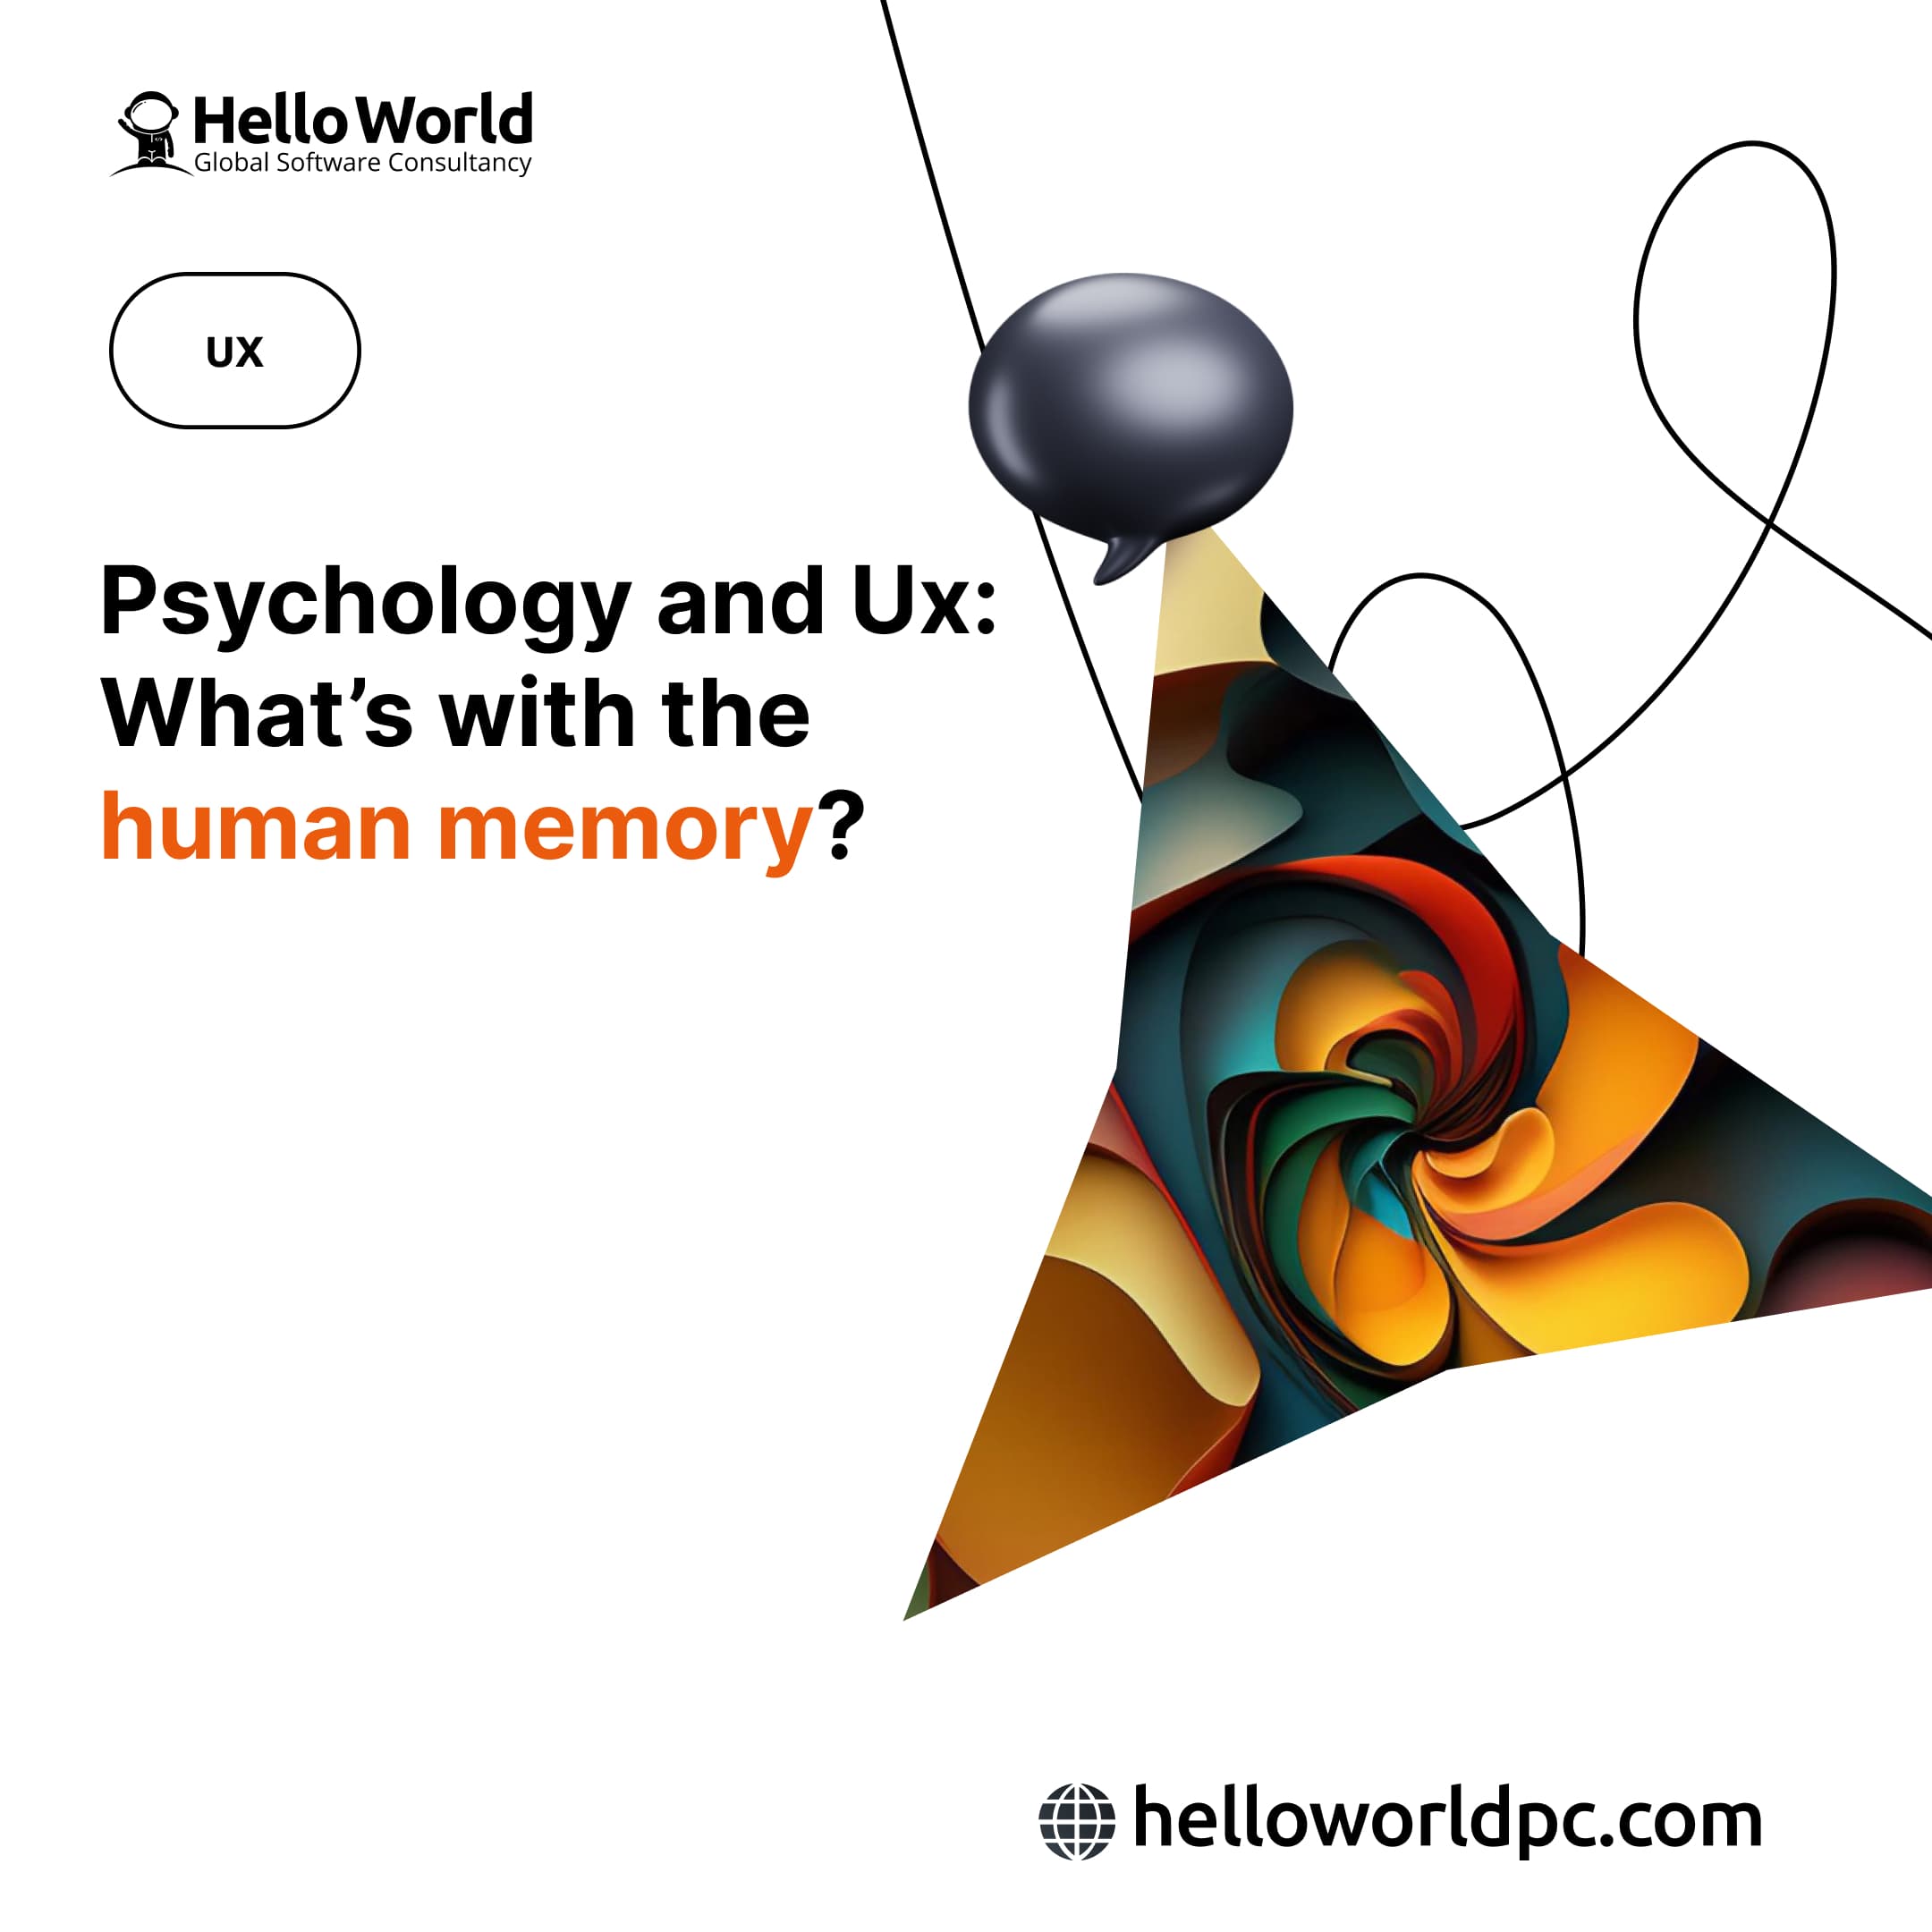 Psychology and UX: What’s with the human memory?